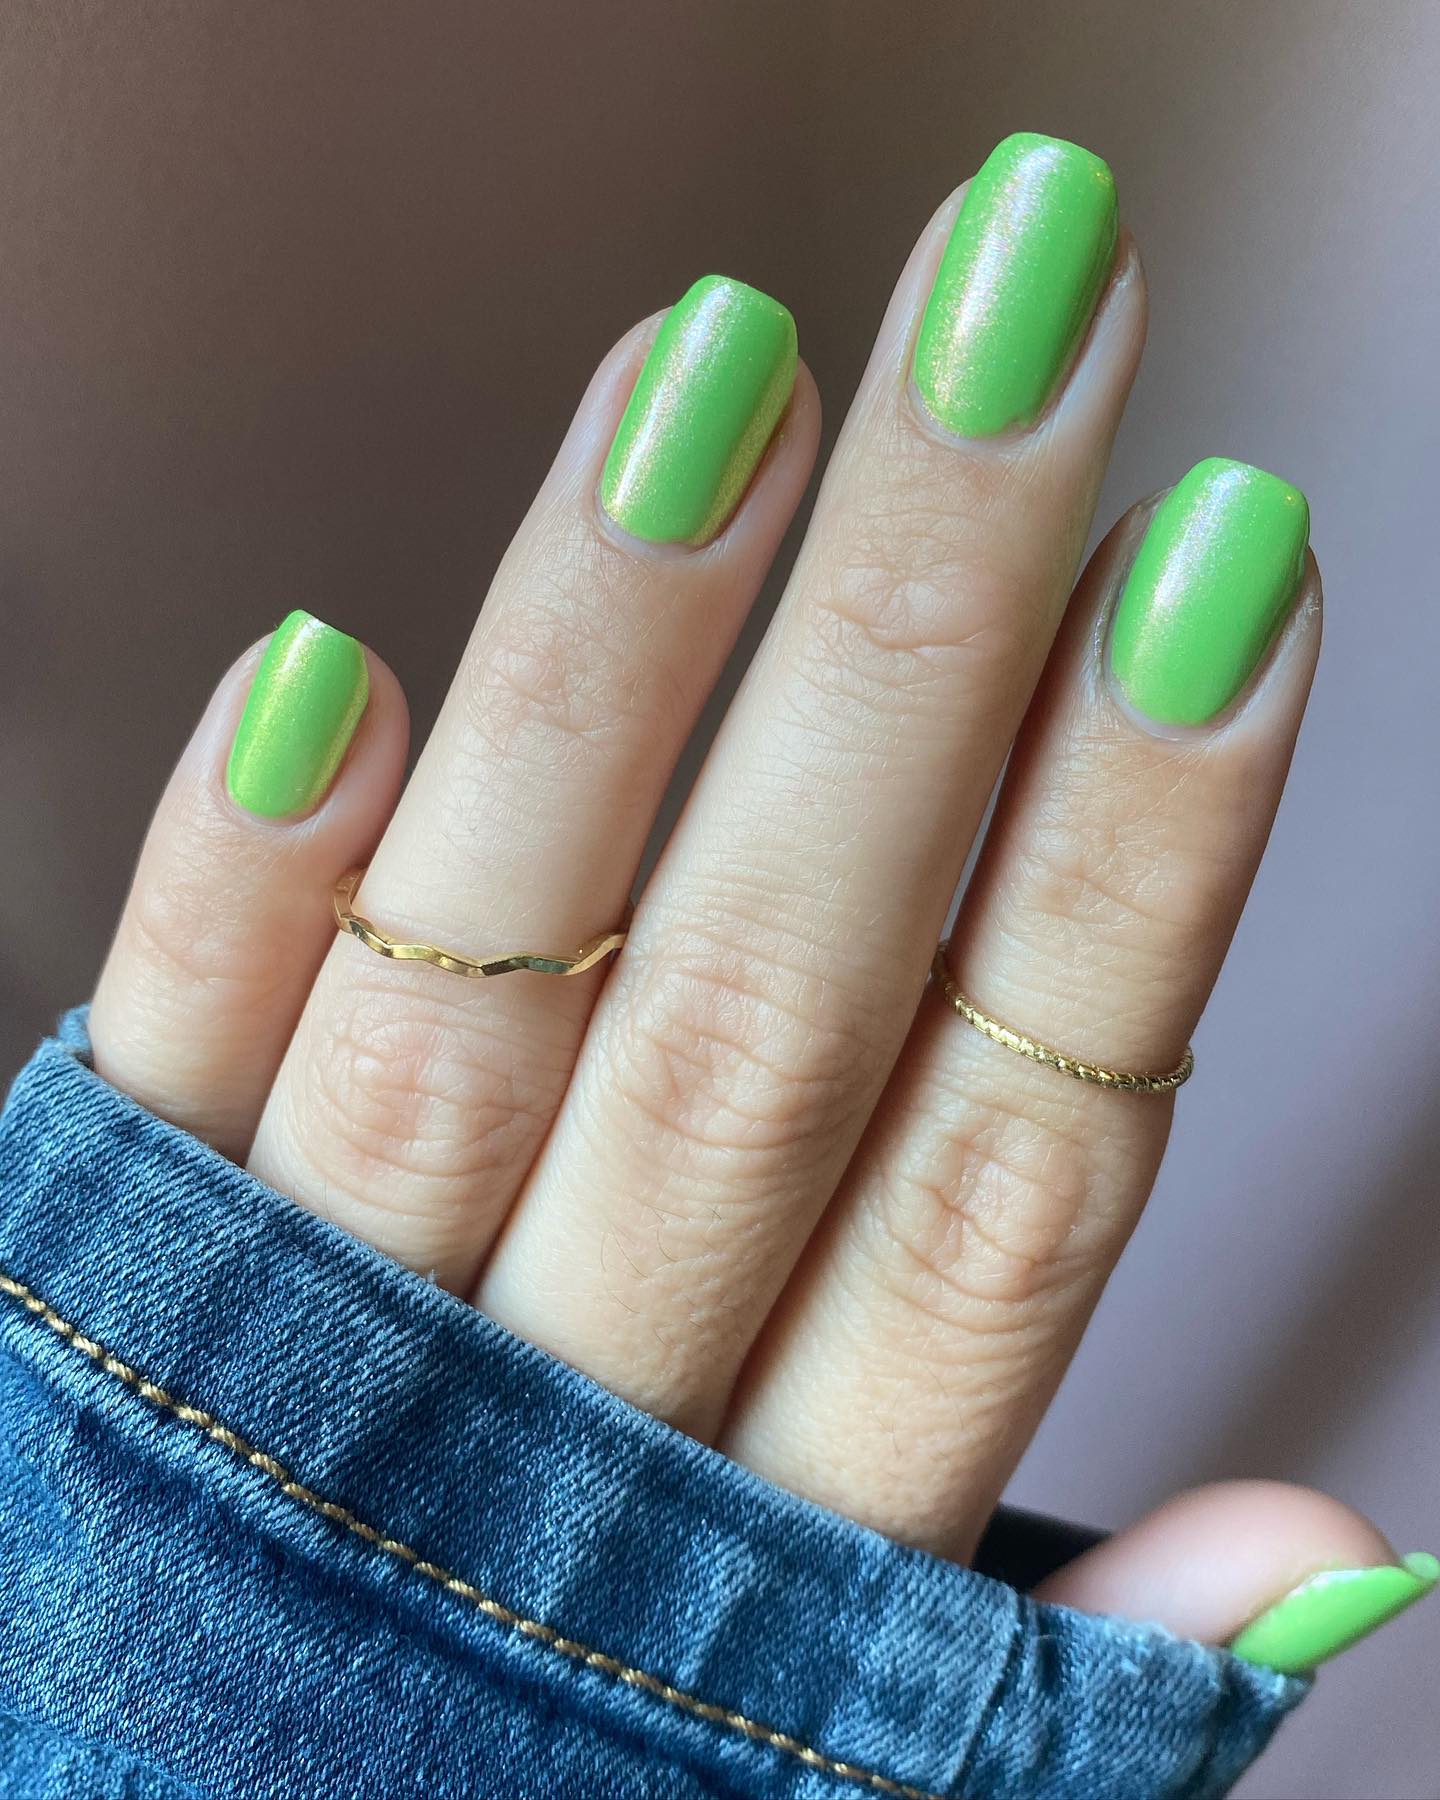  Simple and plain... With this light glittered green nails, you will be a classic chic.